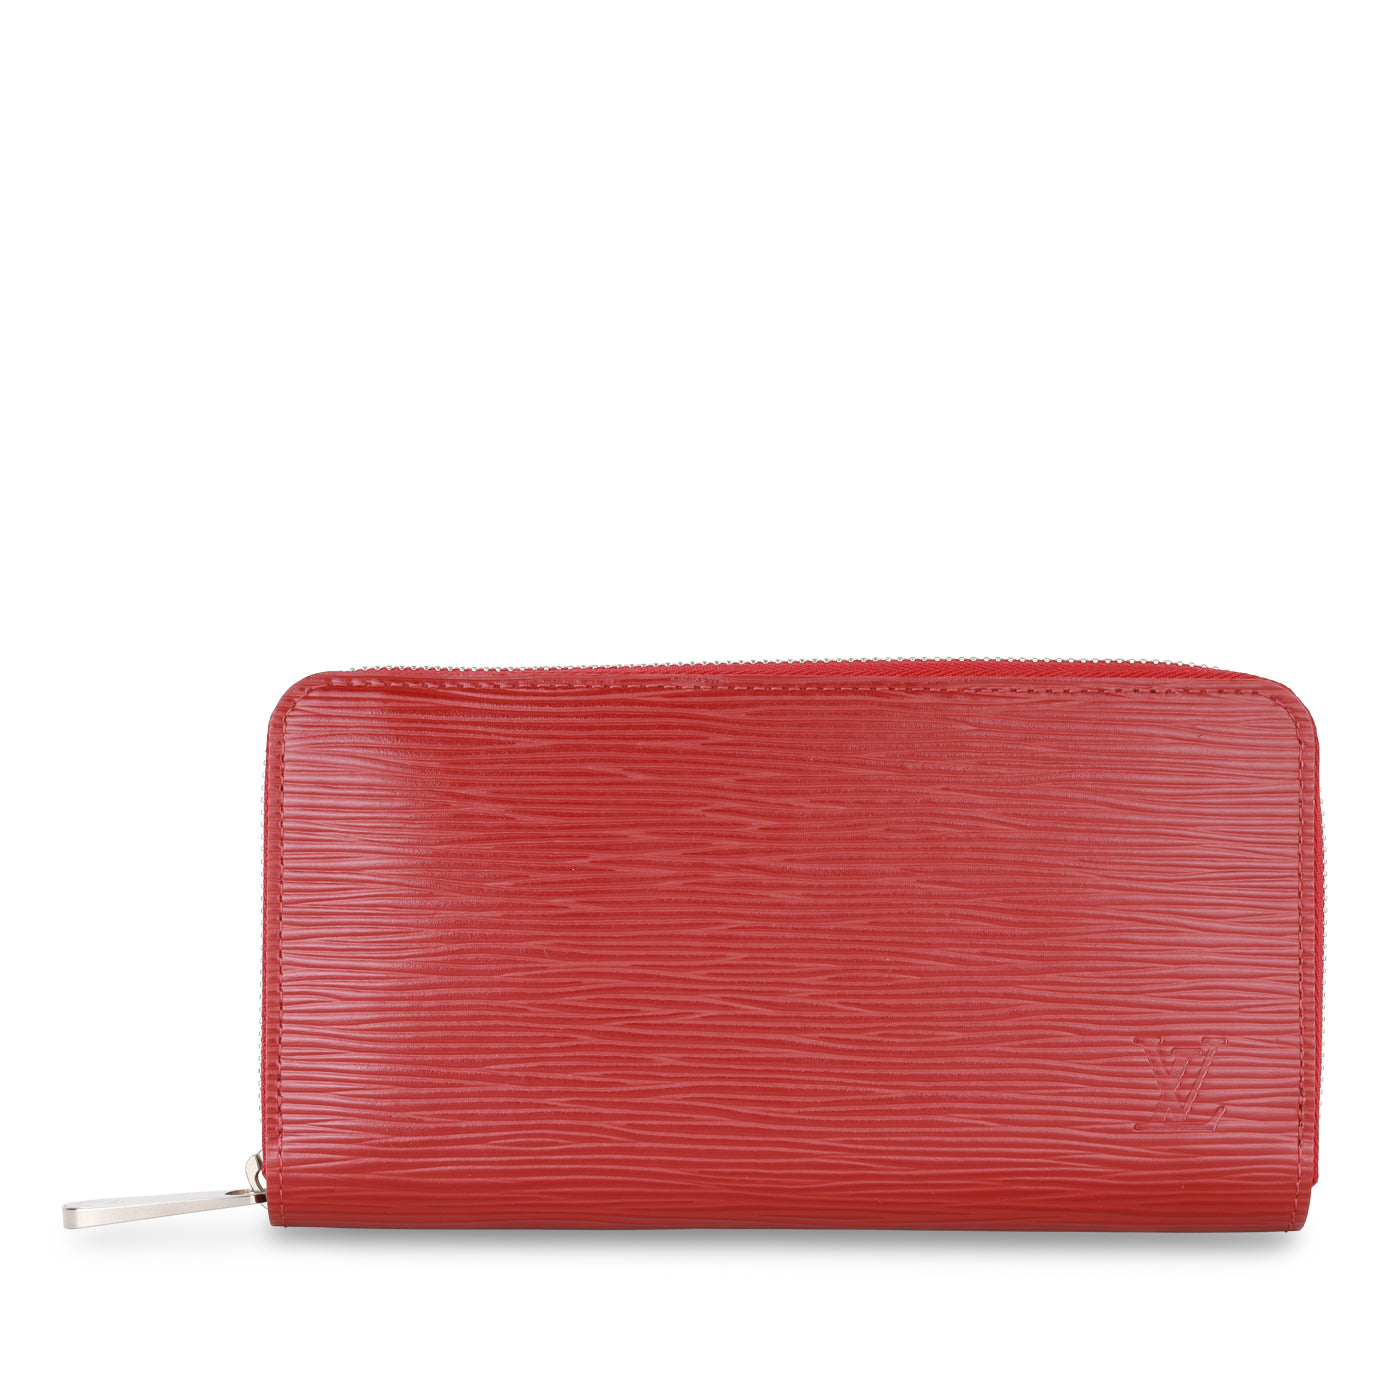 Louis Vuitton Red Epi Leather Zippy Wallet at Jill's Consignment